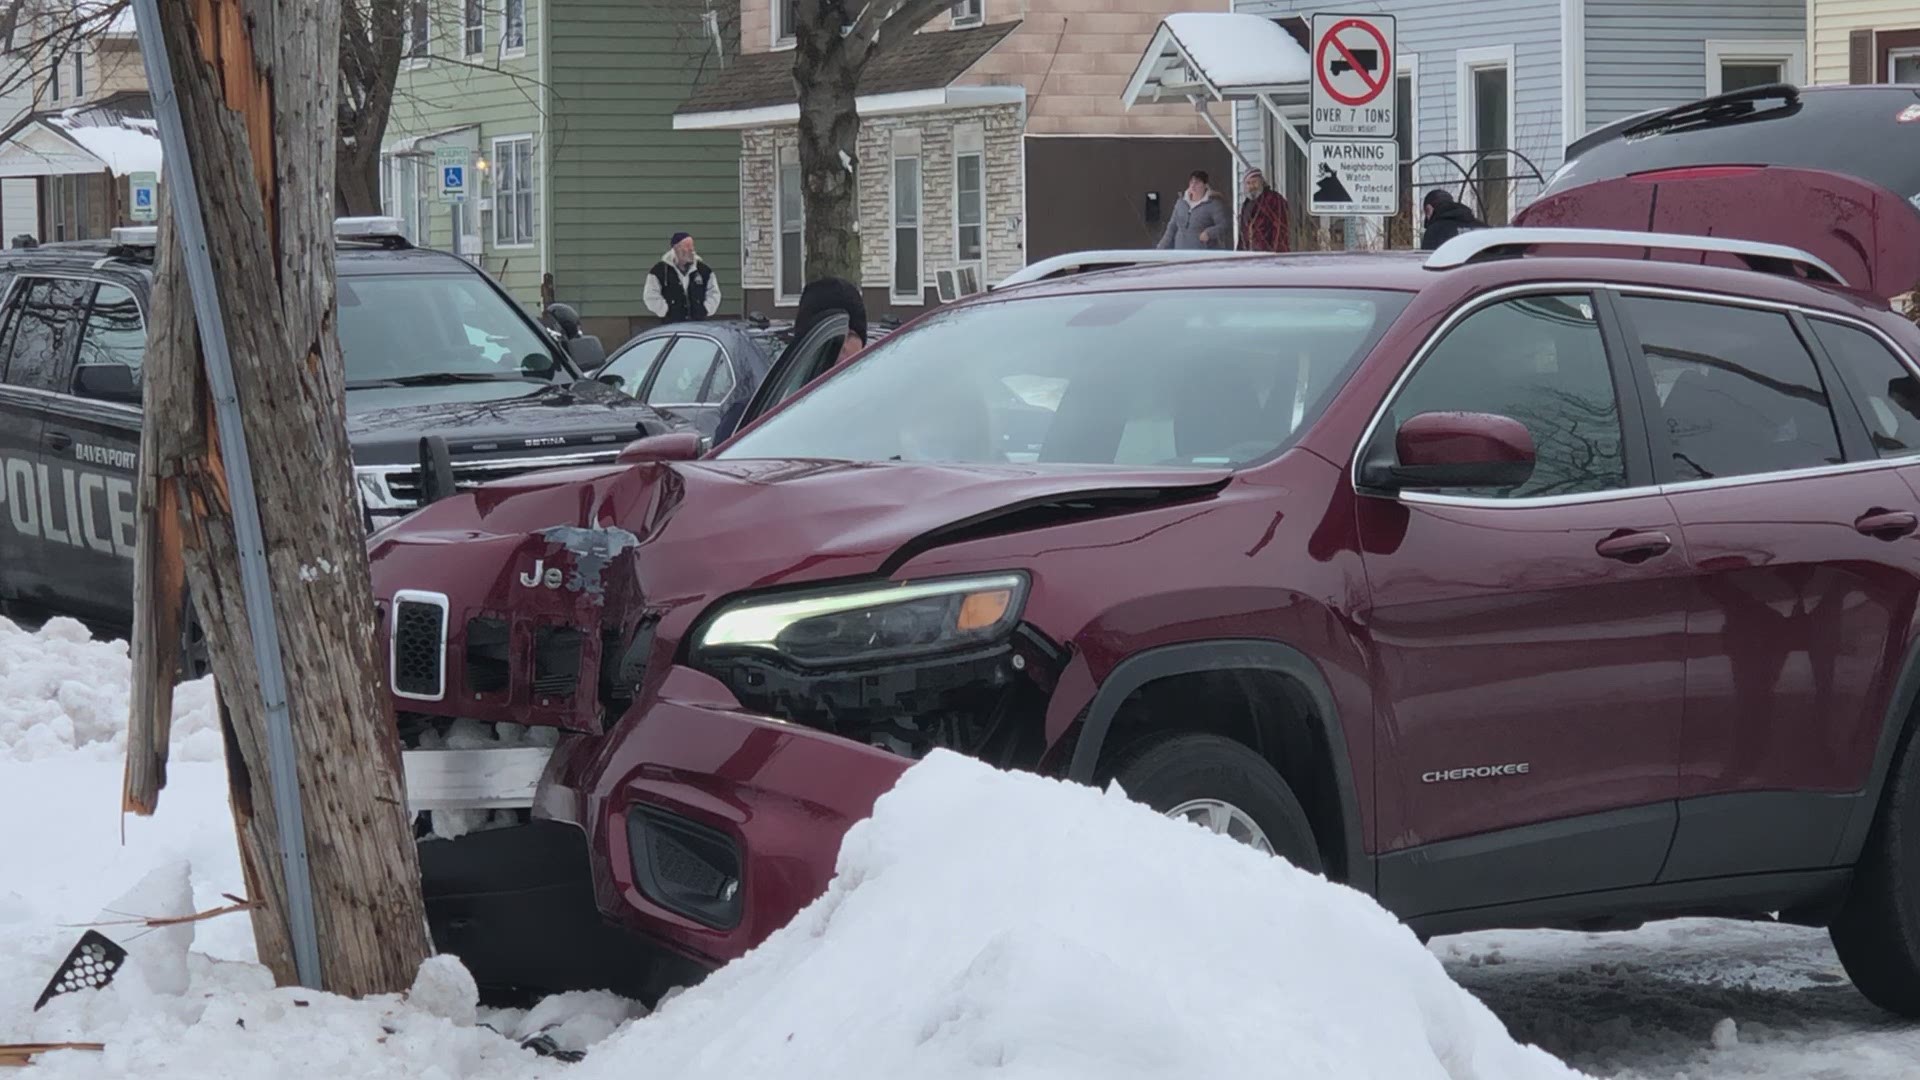 The Jeep crashed in the intersection of South Howell Street and West First Avenue just before 9:30 a.m. Feb. 1, 2021.